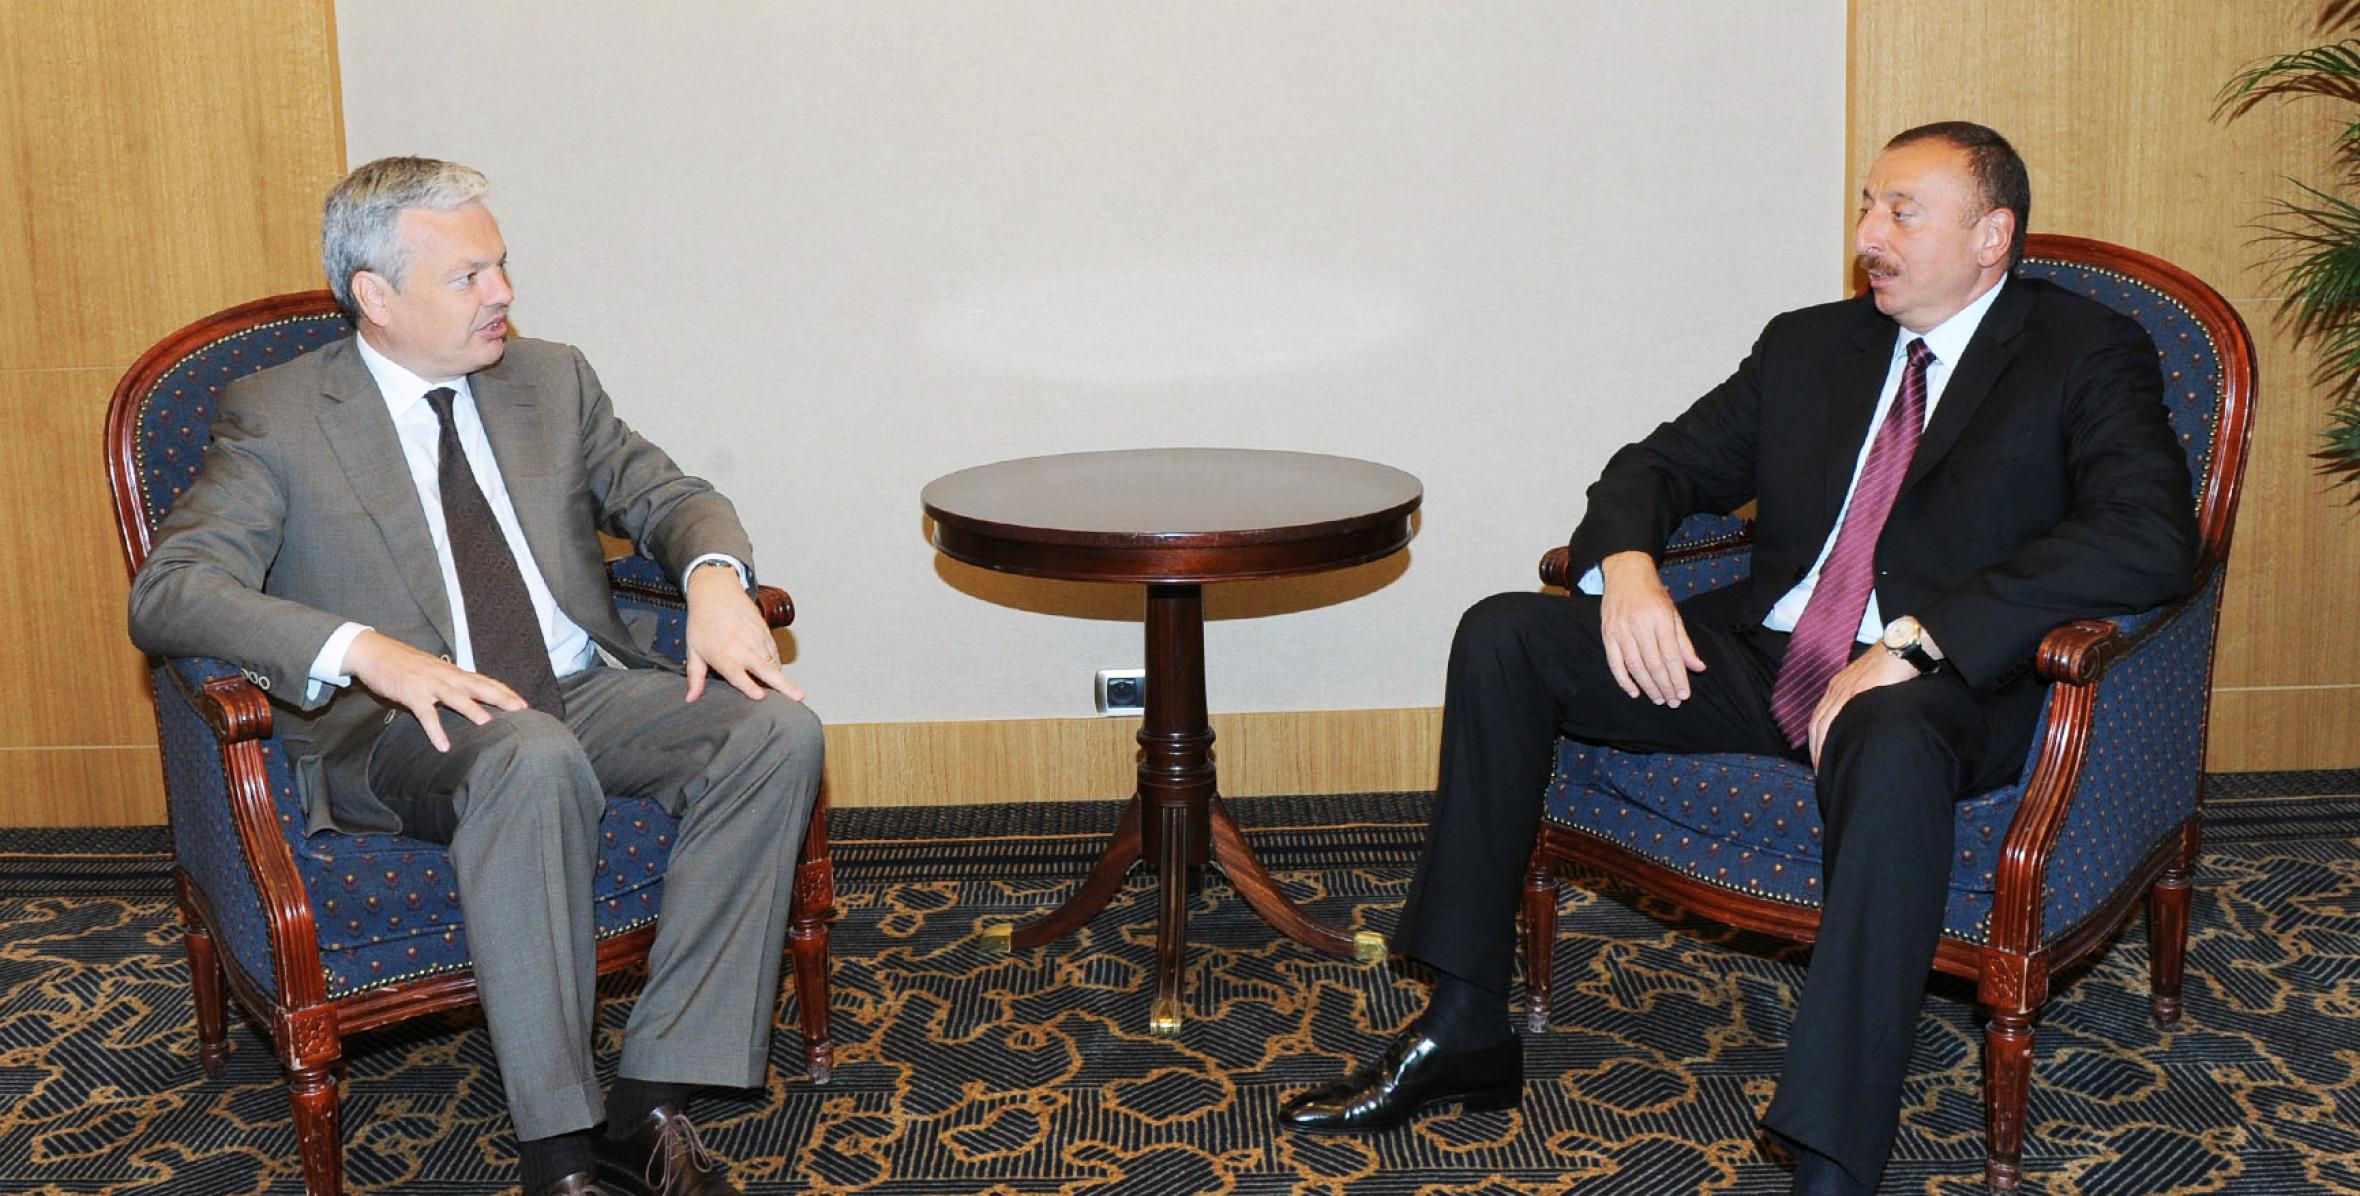 Ilham Aliyev met with Deputy Prime Minister and Minister of Finance of Belgium Didier Reynders in Brussels